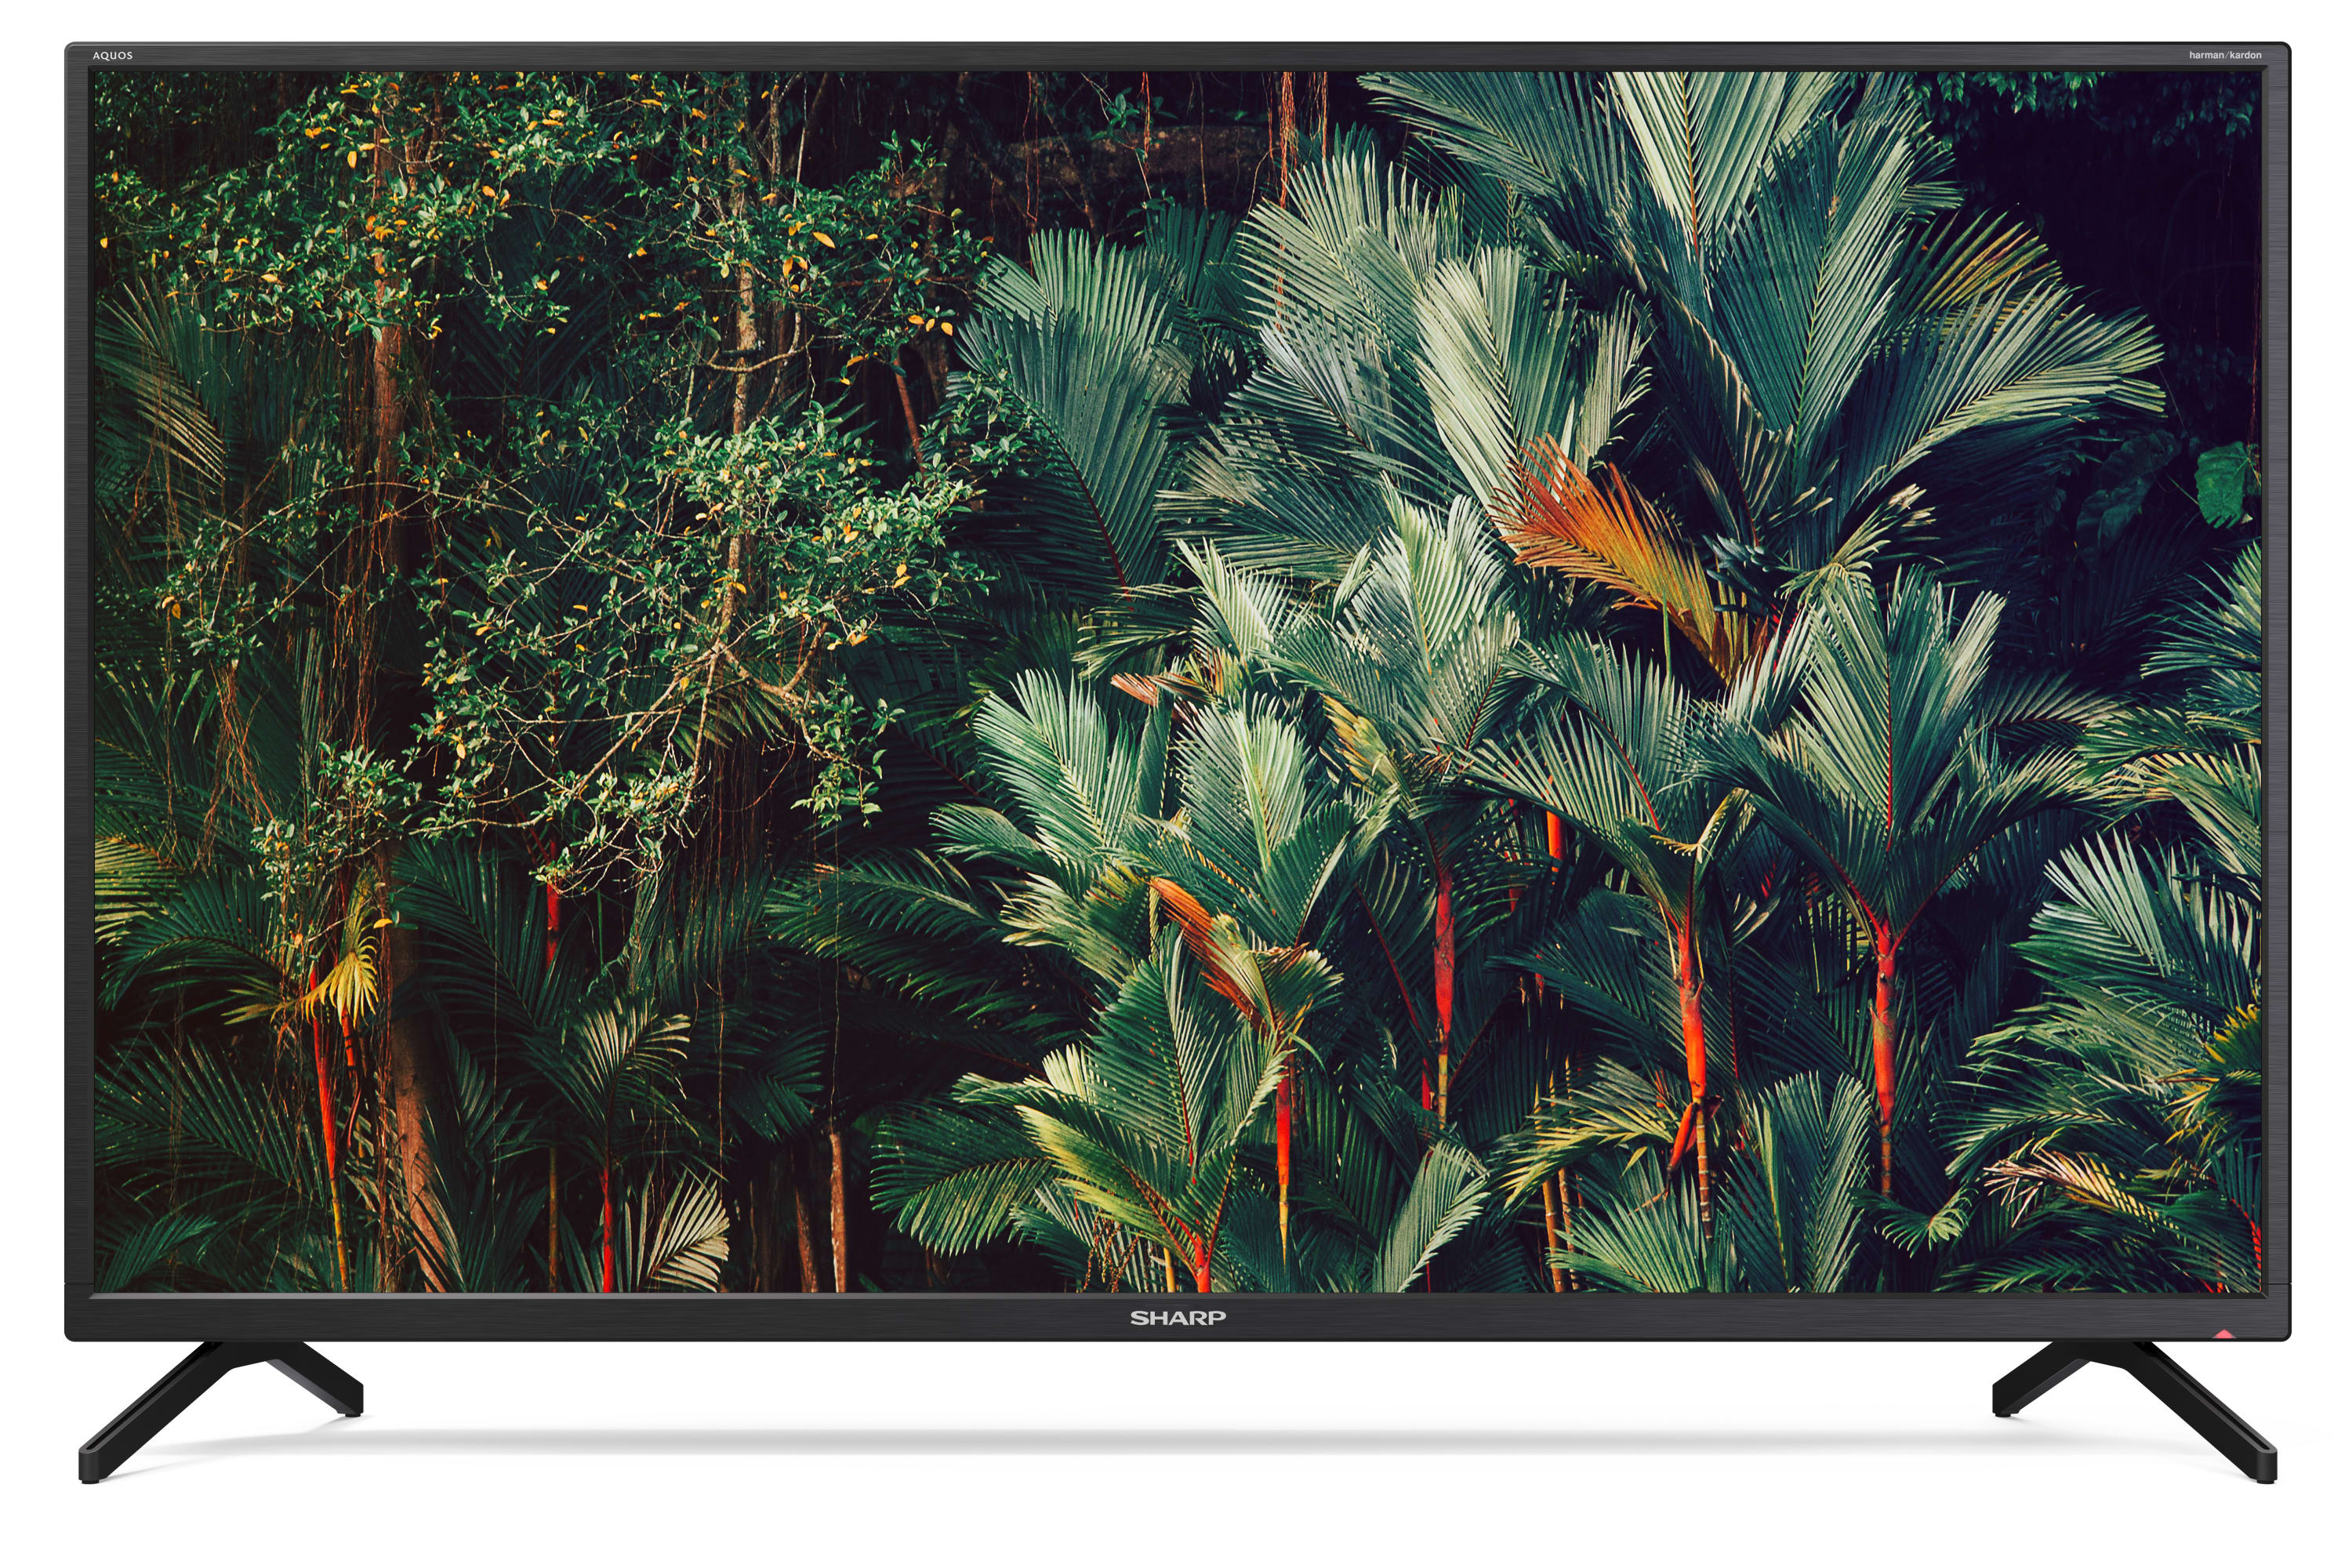 Android TV 4K UHD - 43" 4K ULTRA HD ANDROID TV™